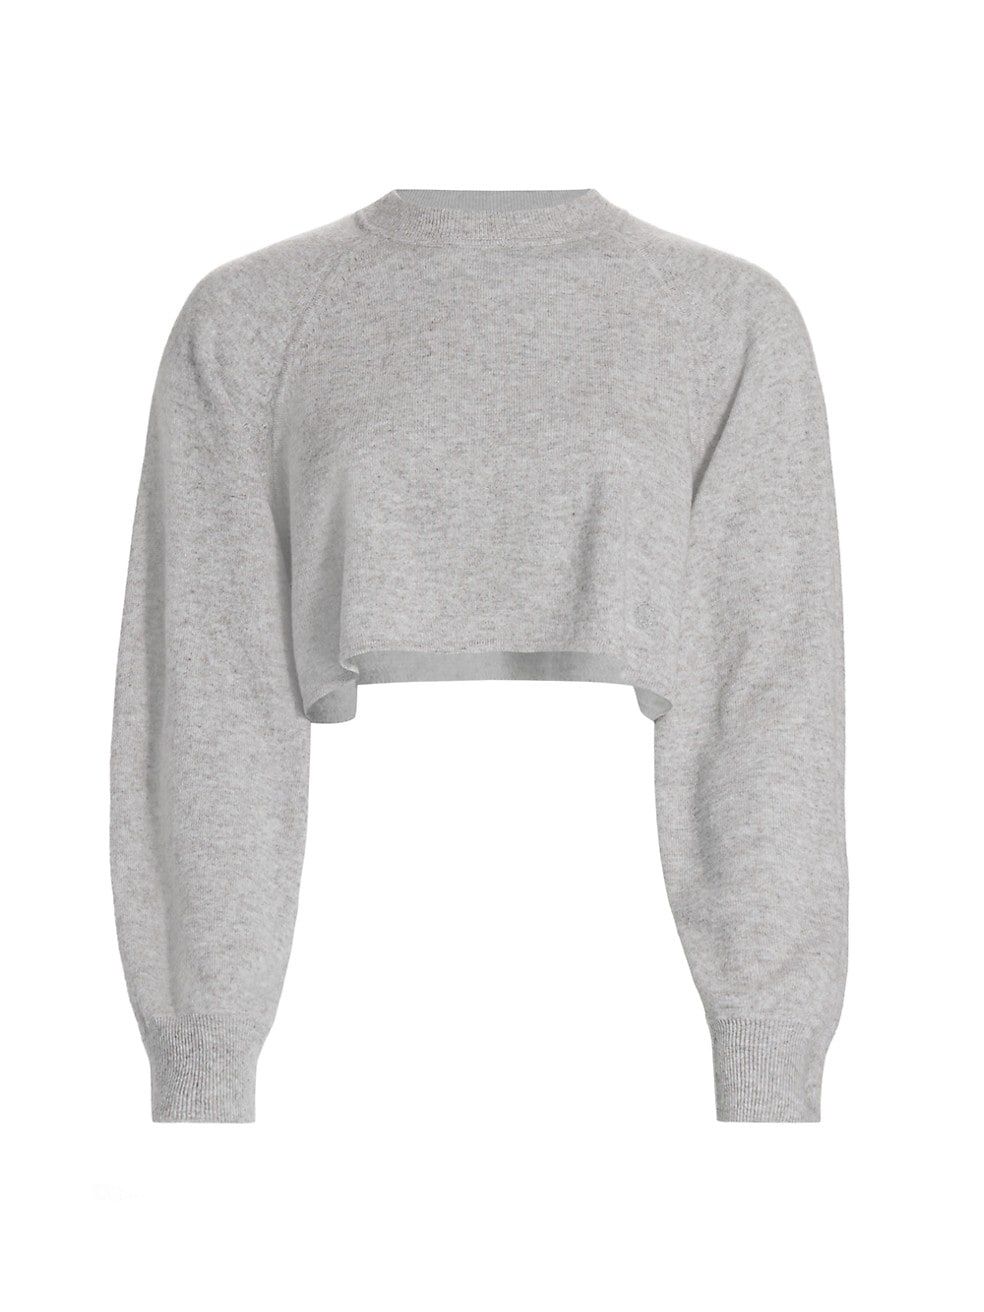 Loulou Studio Cropped Cashmere Sweater | Saks Fifth Avenue